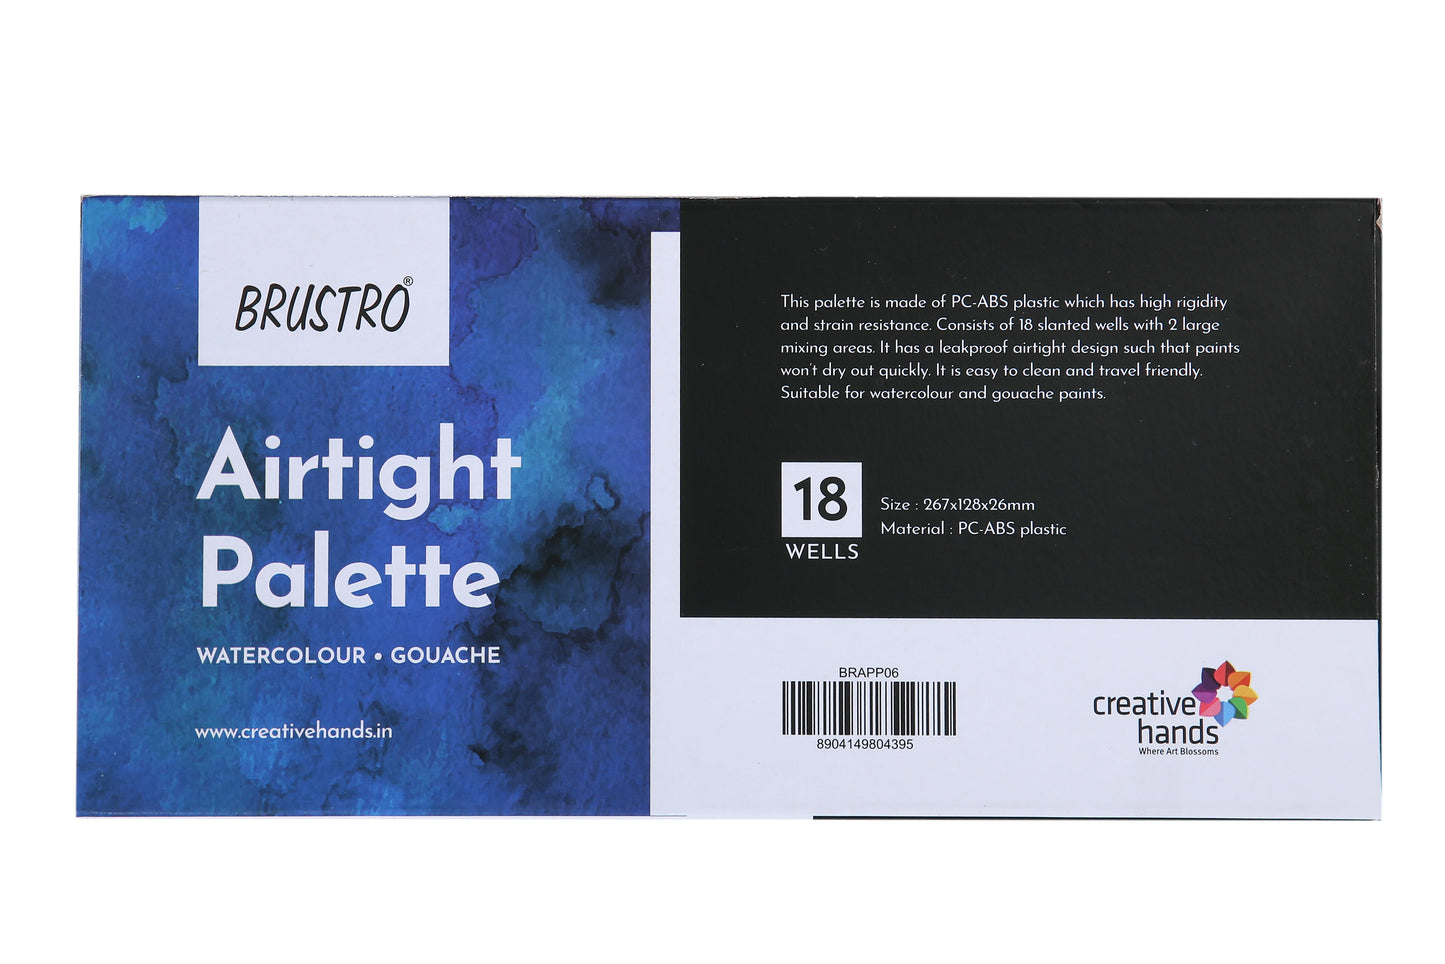 BRUSTRO Artists’ AIRTIGHT Palette 18 Wells with a Removable Clear Tray